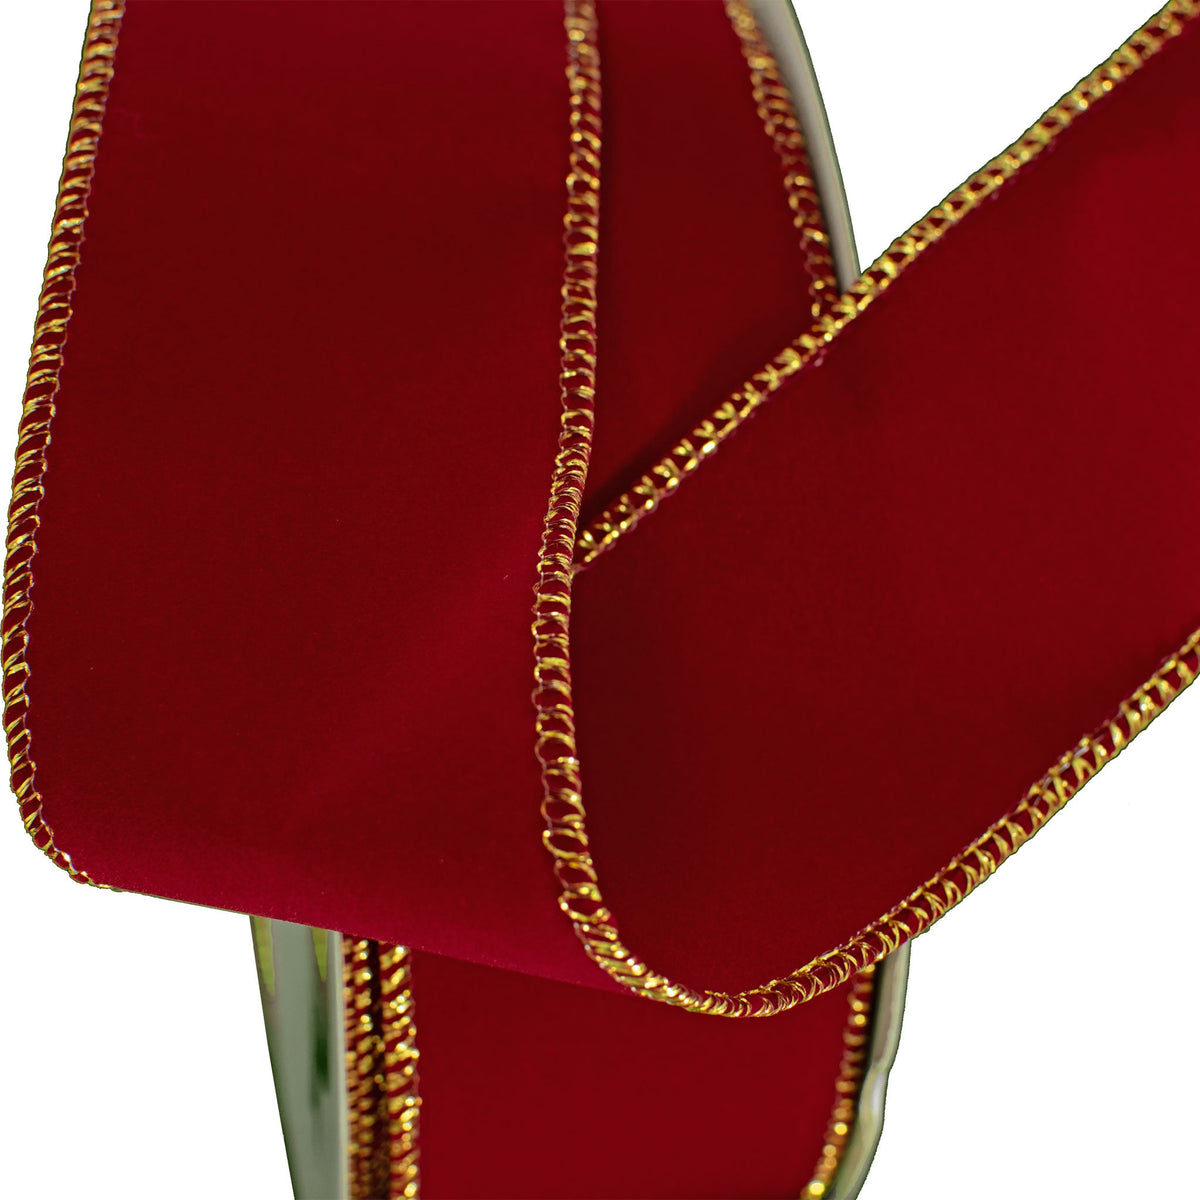 Lee Display's double-sided red velvet ribbon comes with a gold wire edge.